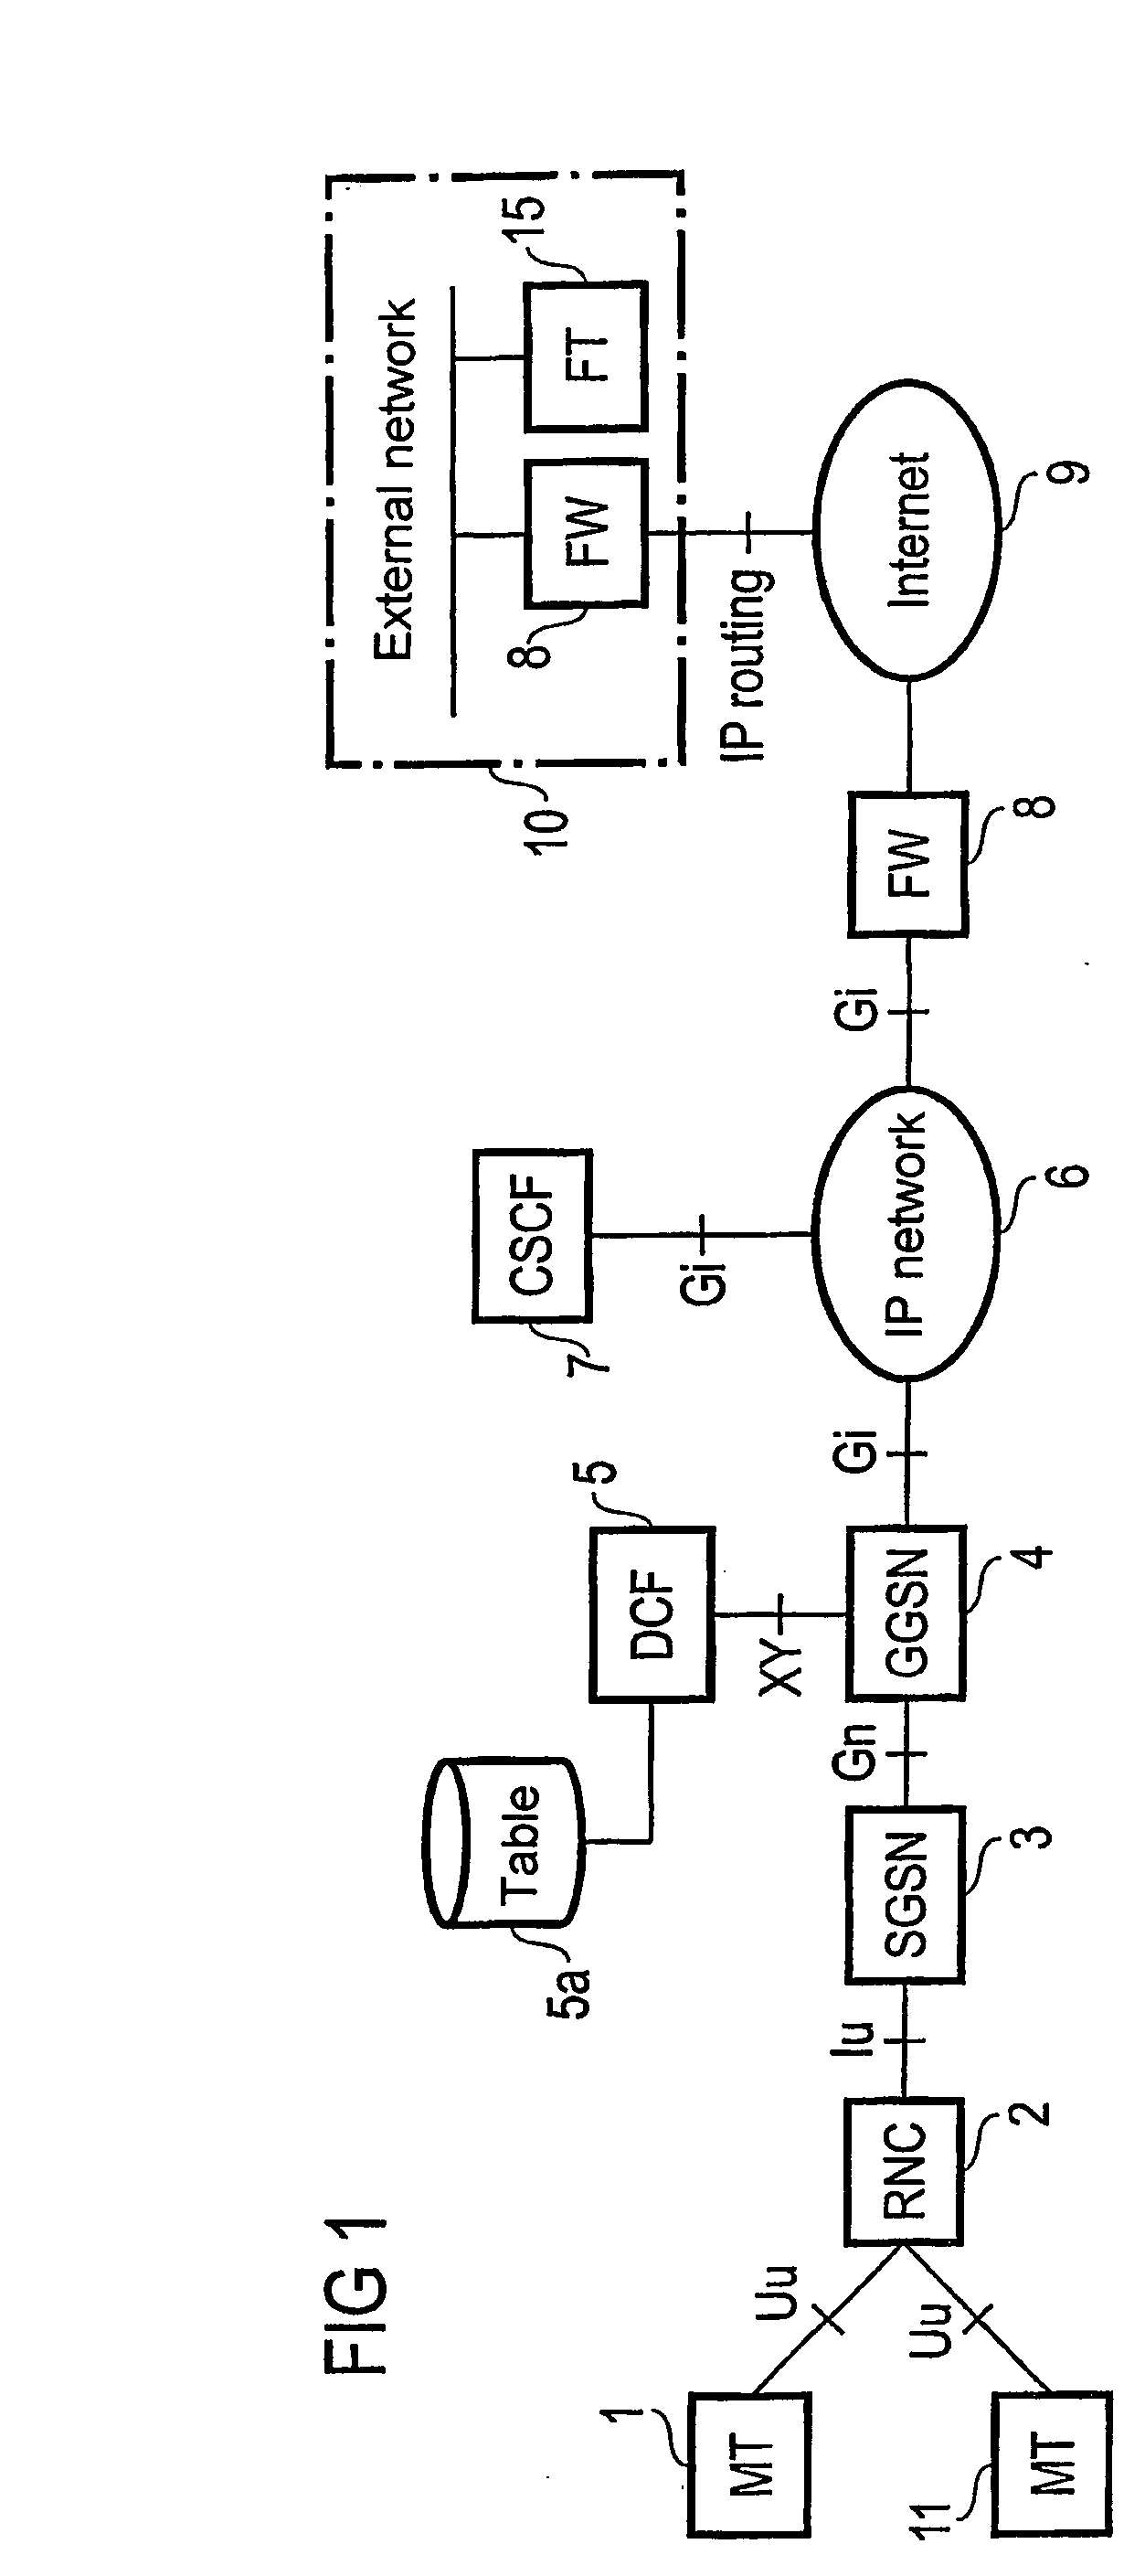 Method and device for transmitting ip packets between a radio network controller (rnc) and another element of a mobile radio network